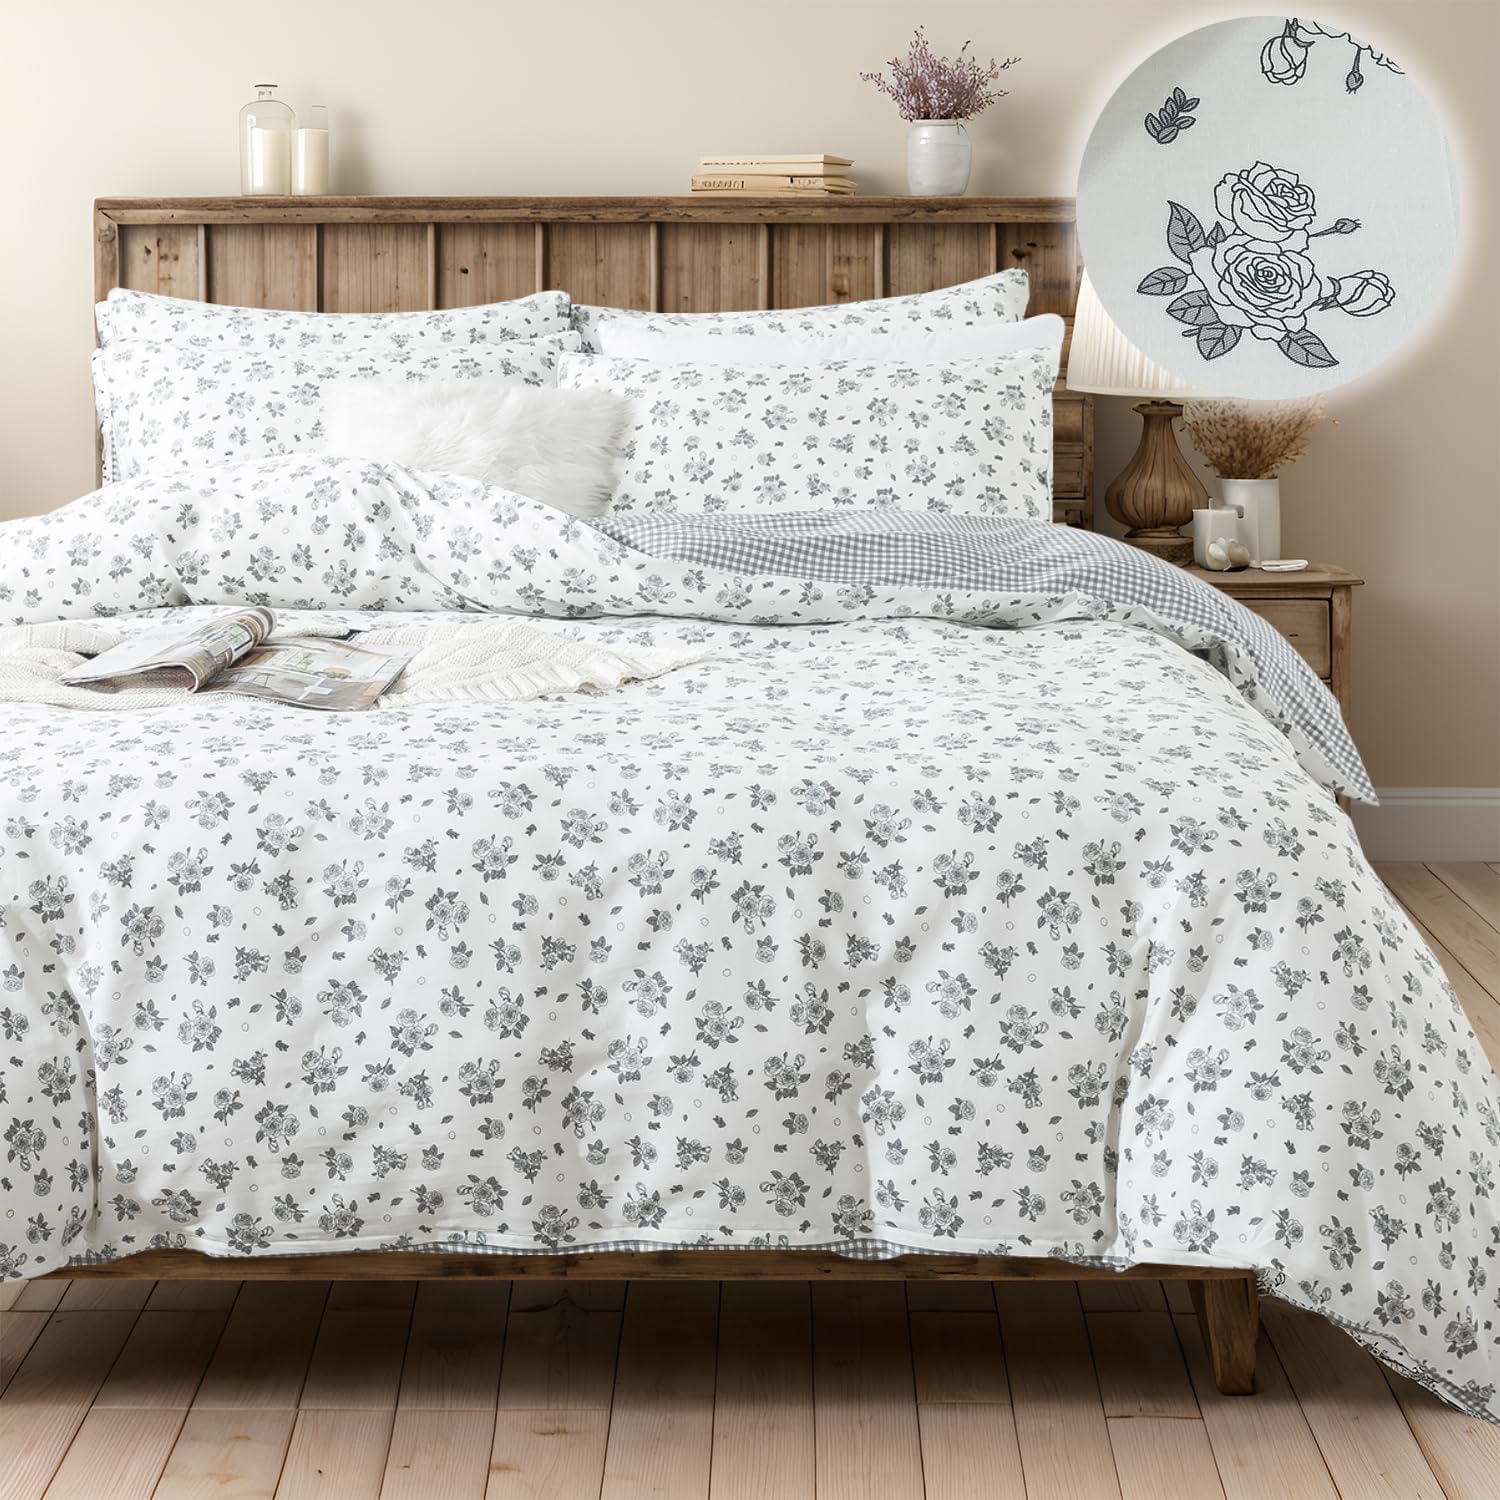 FADFAY Floral Duvet Cover Set Queen Size 100% Cotton Grey White Flower Comforter Cover Soft Breathable Girls Bed Cover Farmhouse Bedding with Hidden Zipper 3 Pcs, Queen